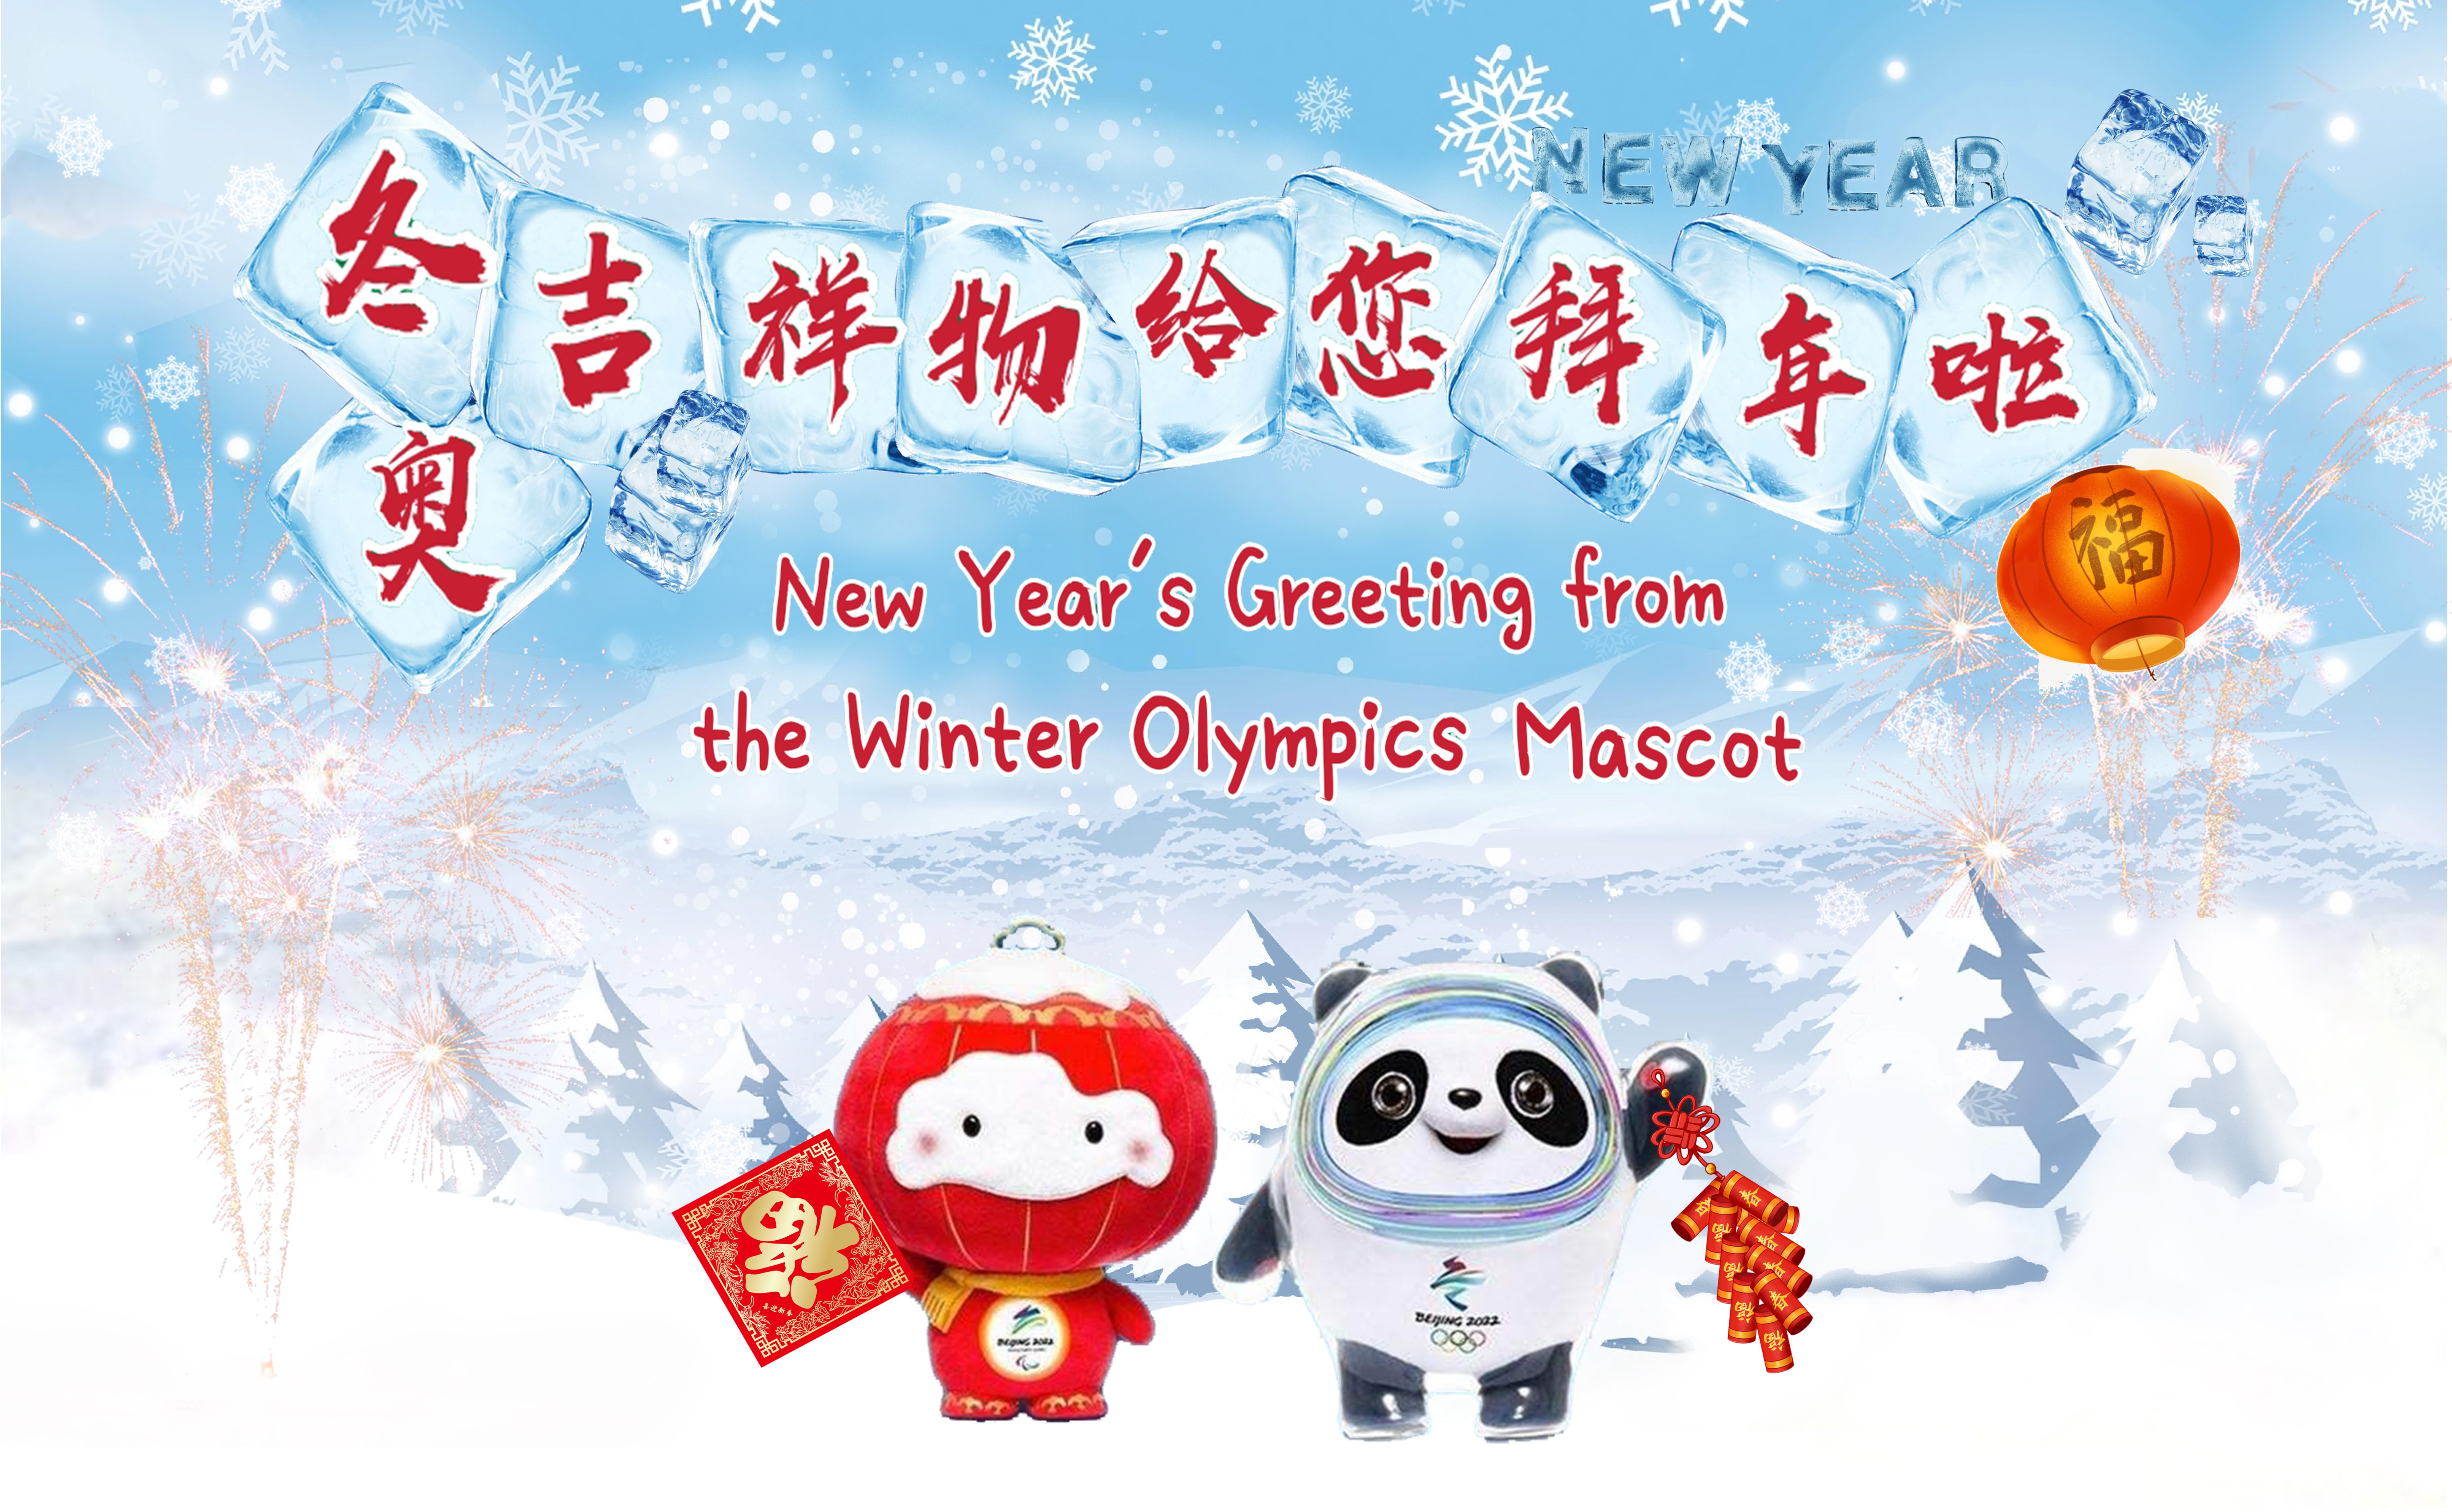 New Year’s Greeting from the Winter Olympics Mascot！